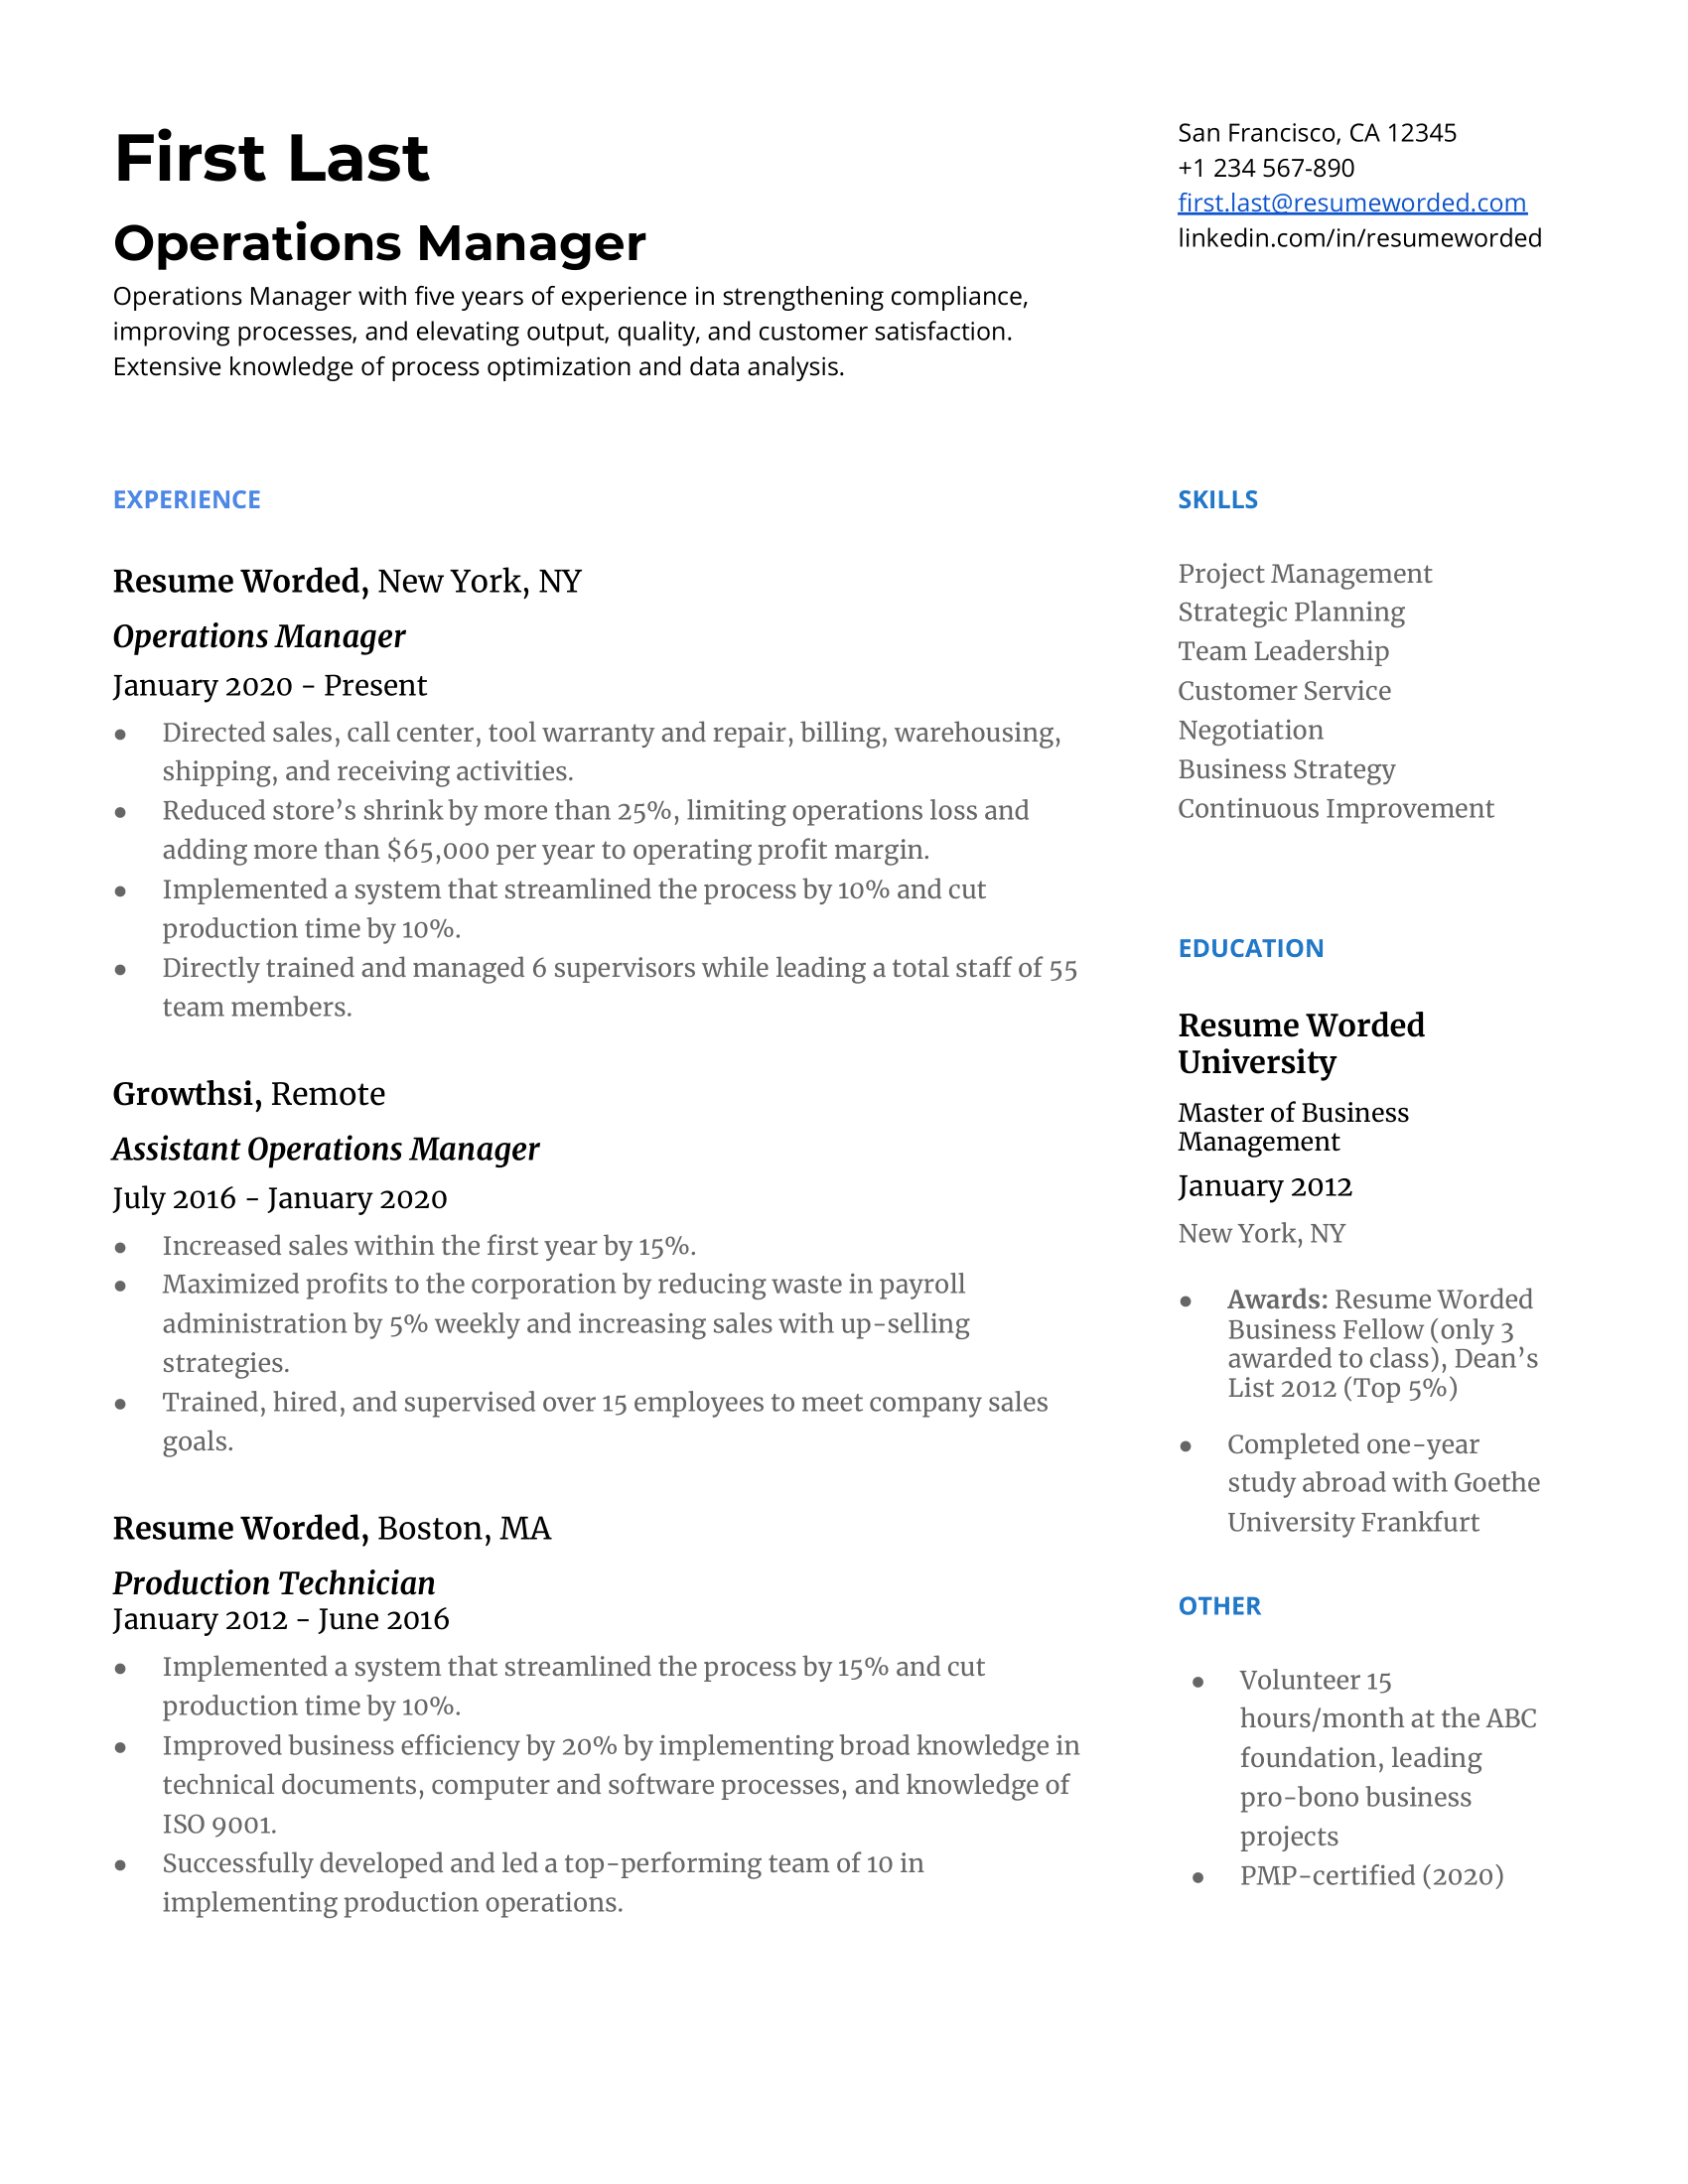 An example of a well-crafted operations manager's CV.